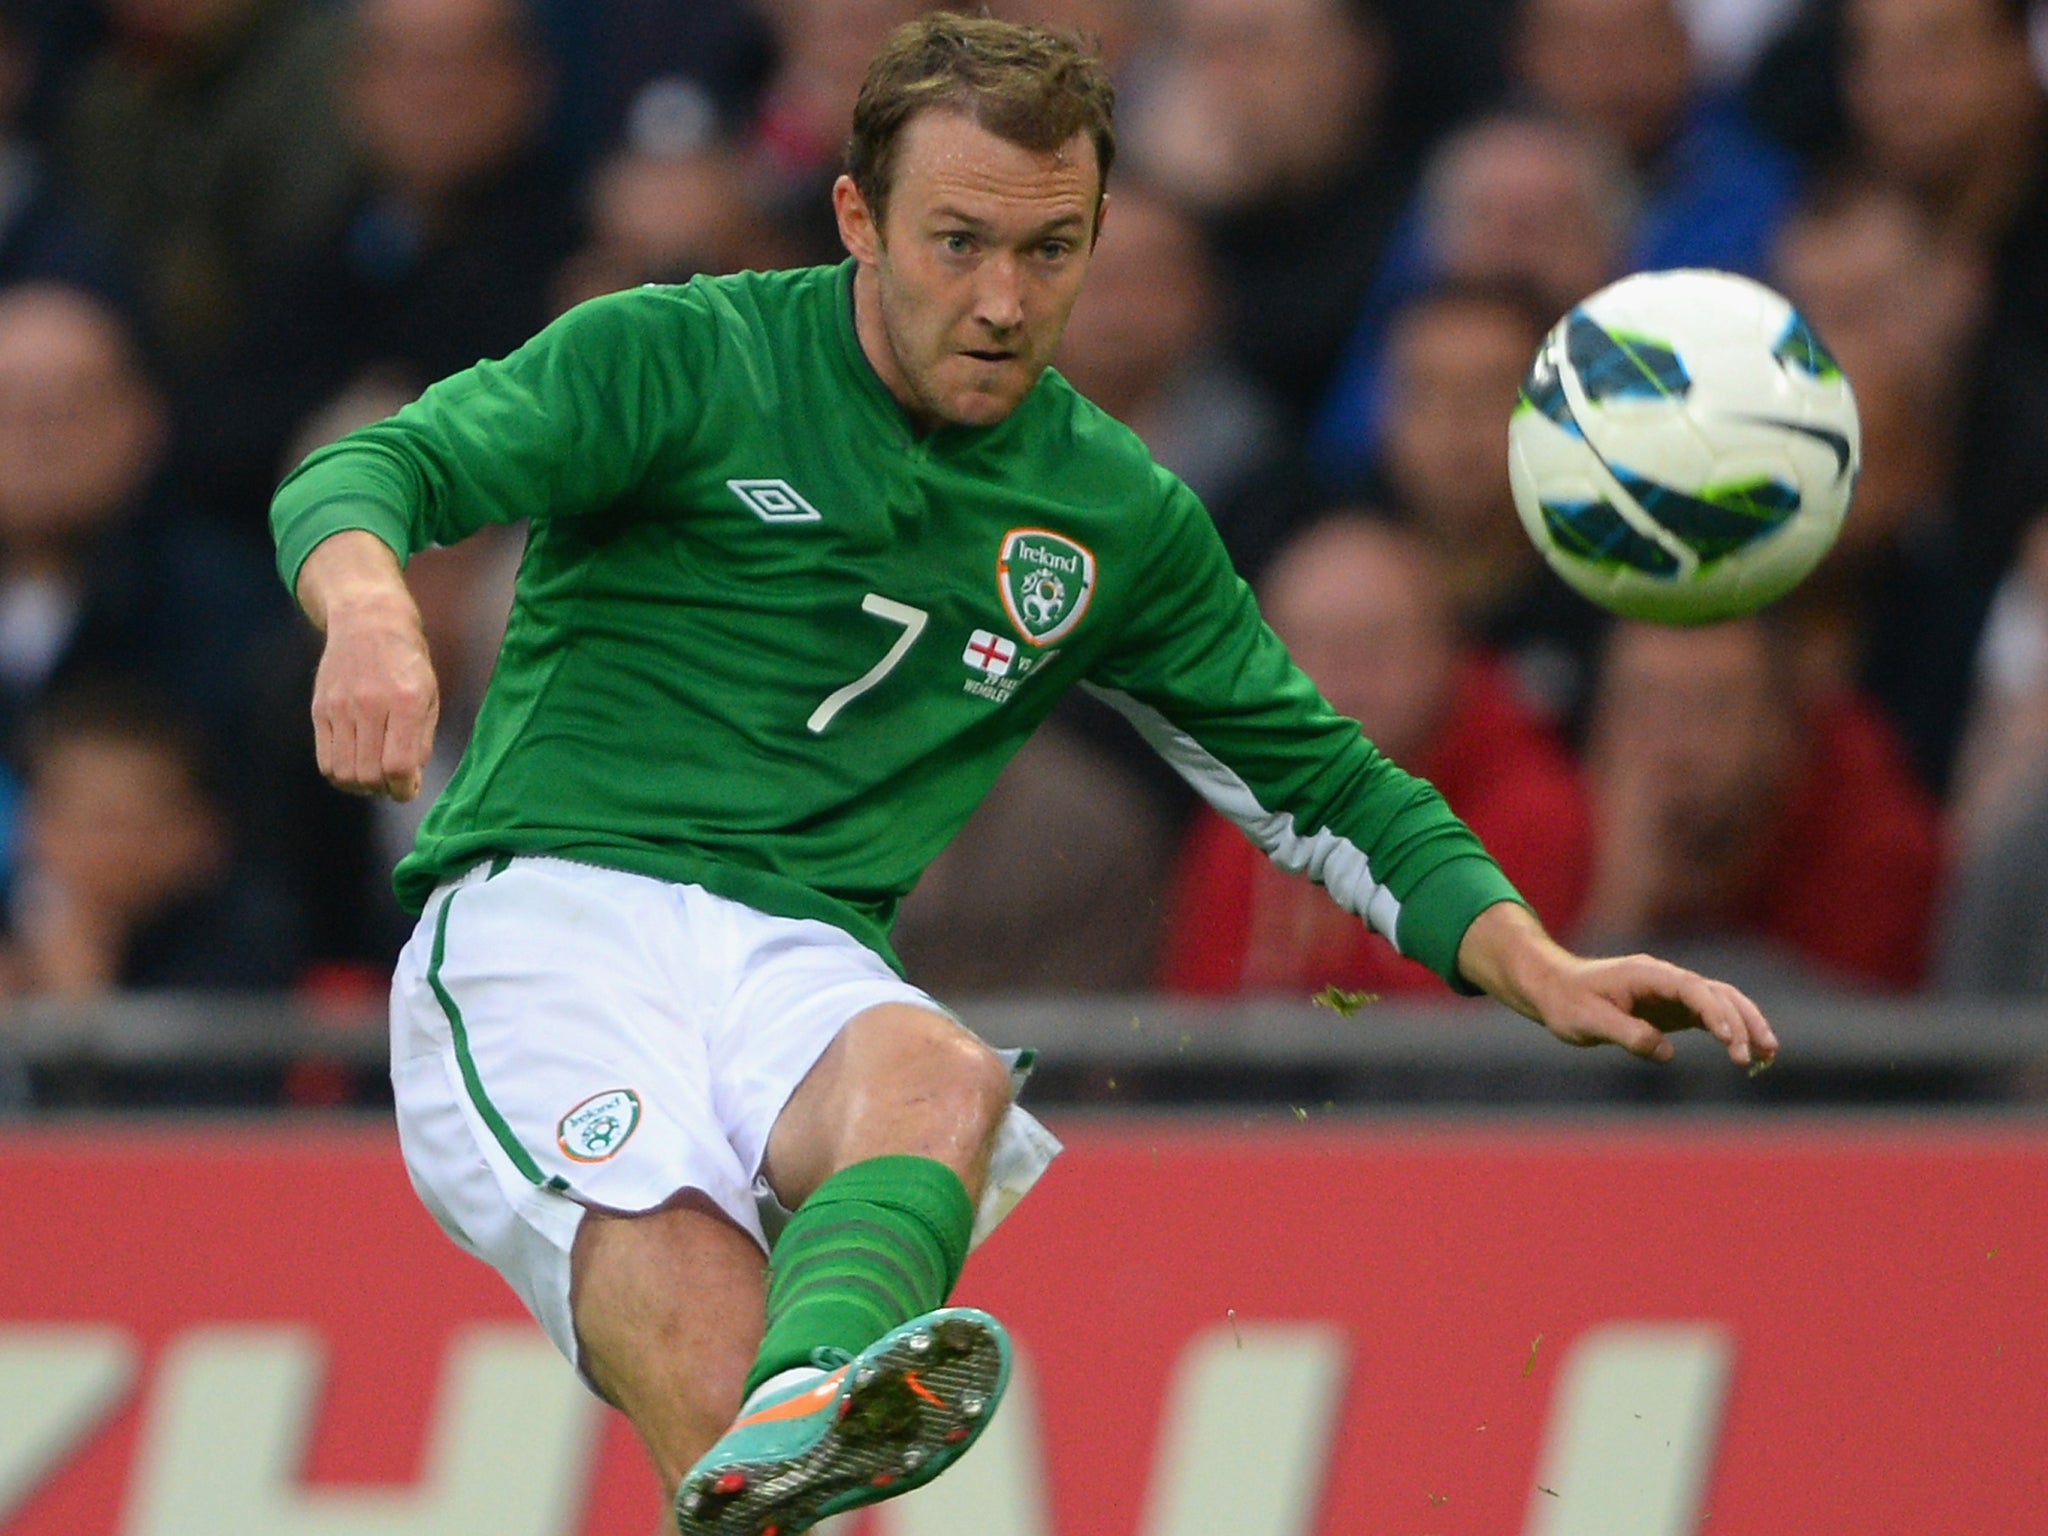 Aiden McGeady has joined Everton from Spartak Moscow on a four-and-a-half year deal